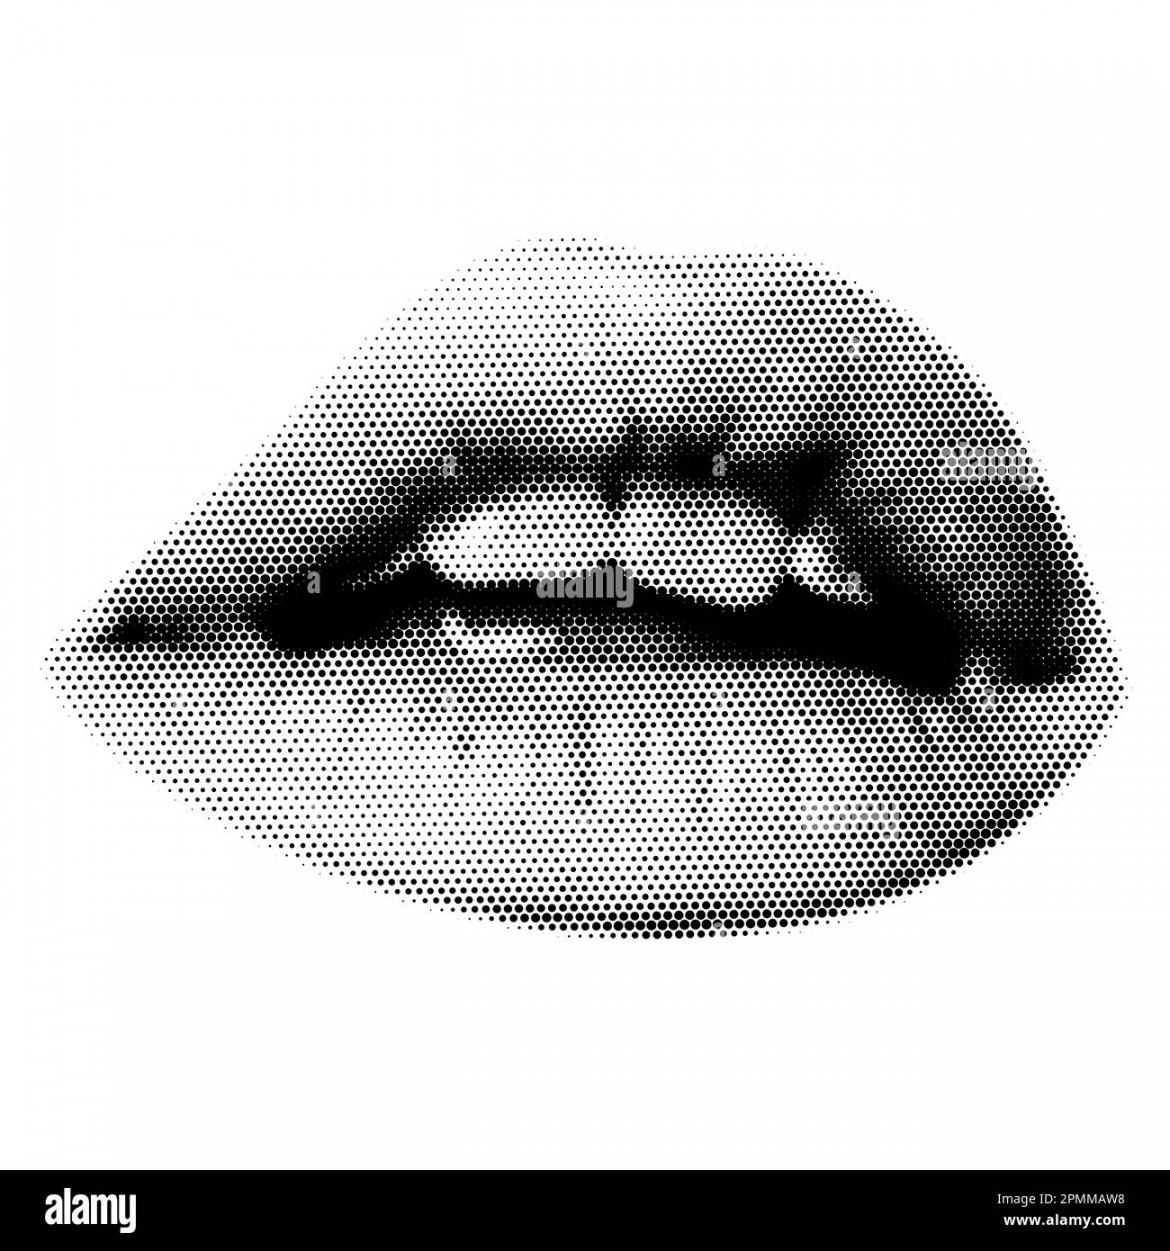 Halftone mouth